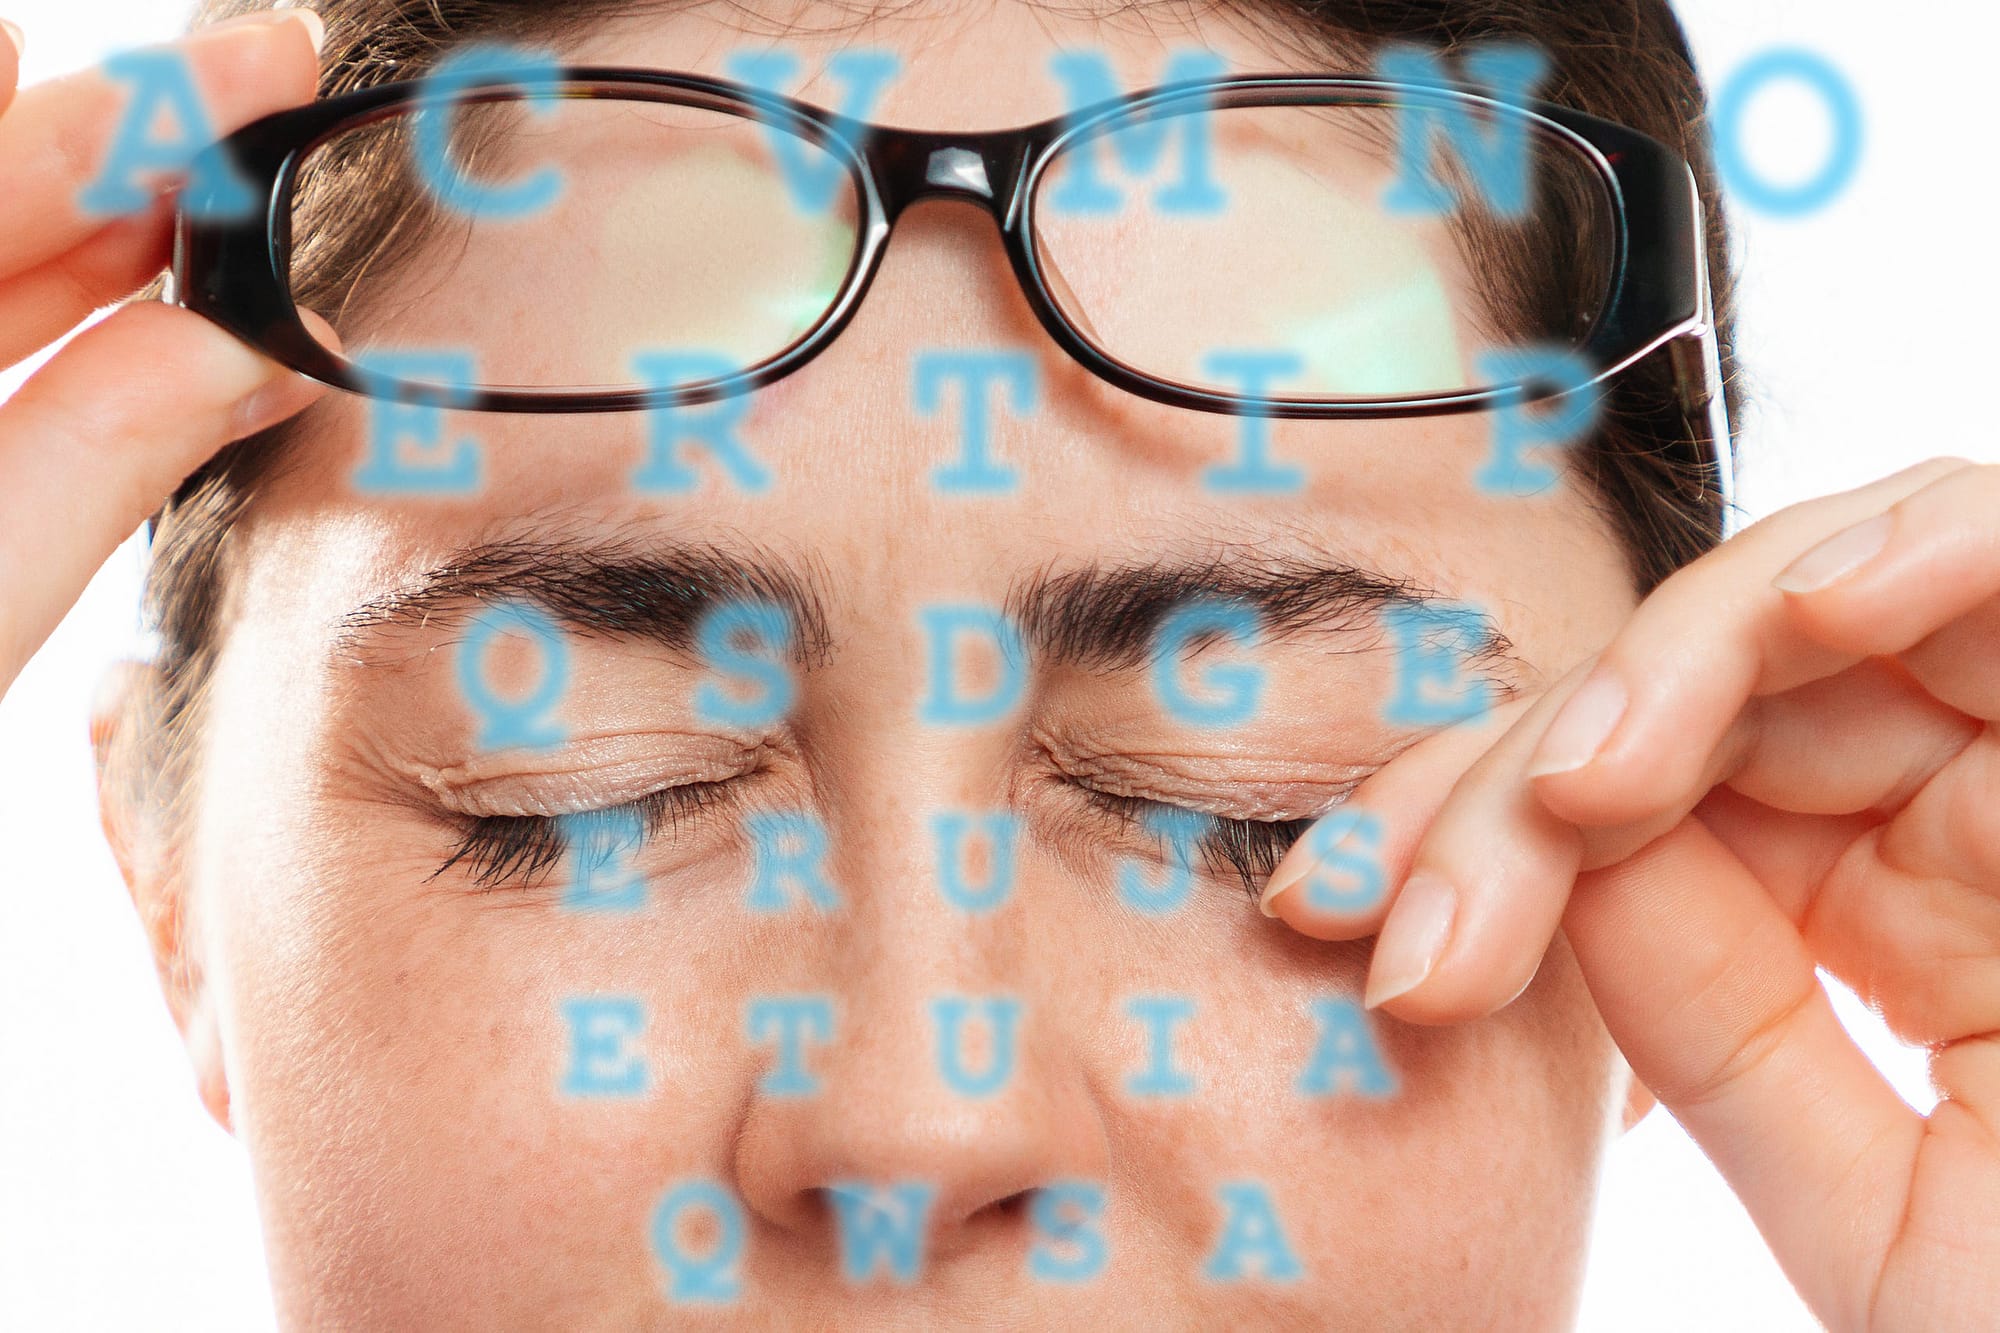 Close-up of woman’s face scratches her painful eyes, taking off her glasses. Blue letters in the foreground. The concept of unhealthy eyes and vision